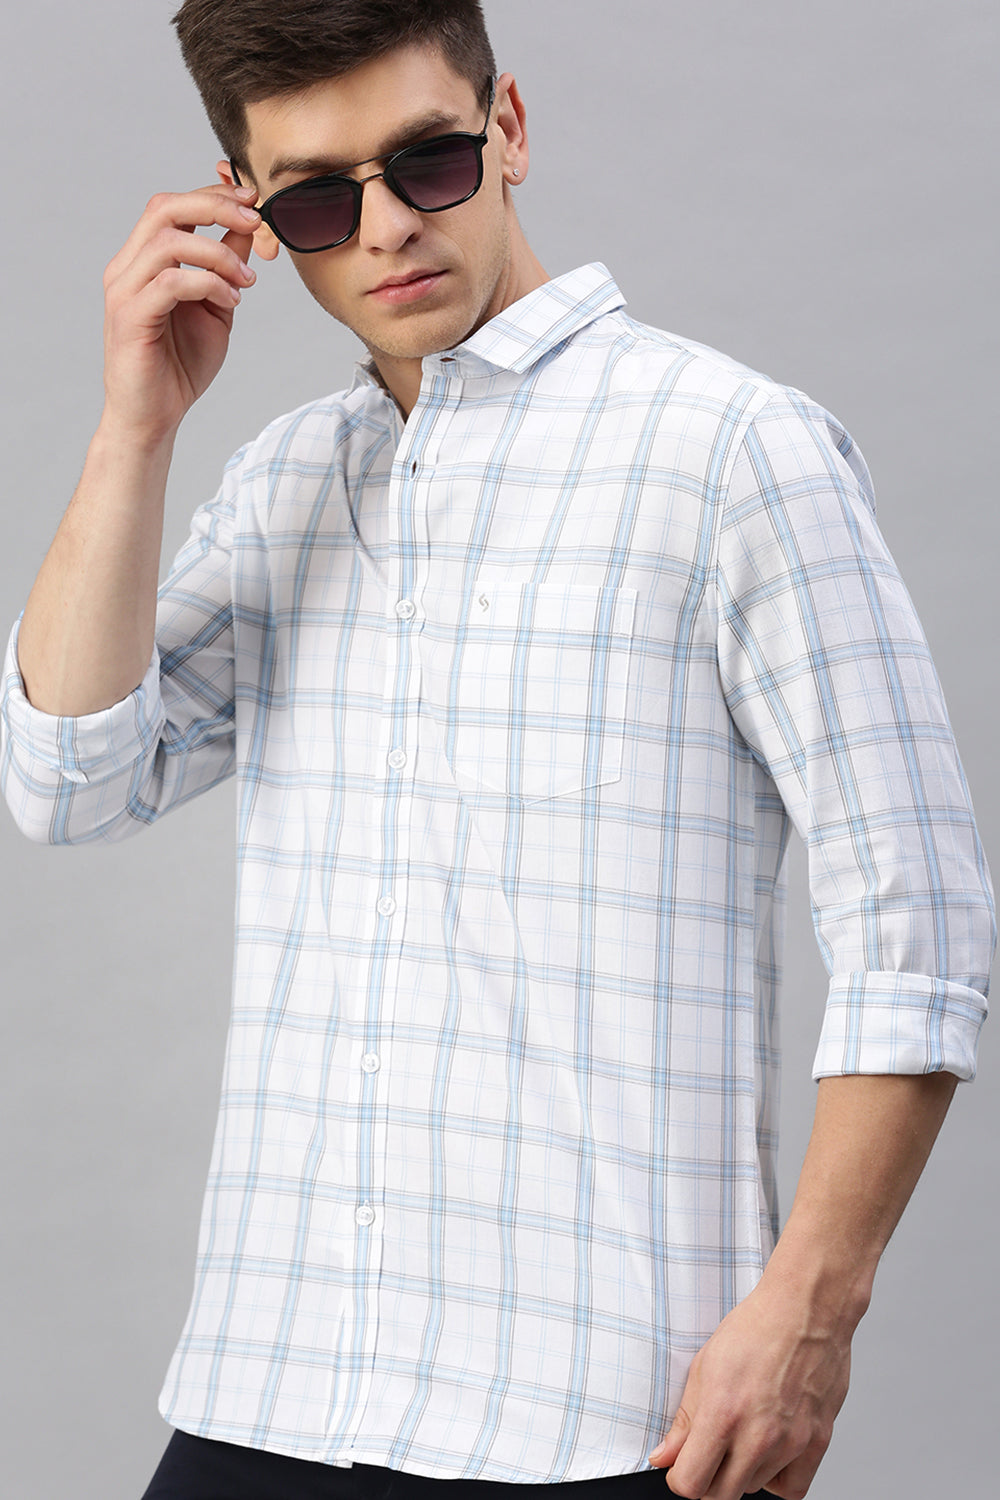 Classic Polo Men's Cotton Full Sleeve Checked Slim Fit Polo Neck White Color Woven Shirt | So1-95 A